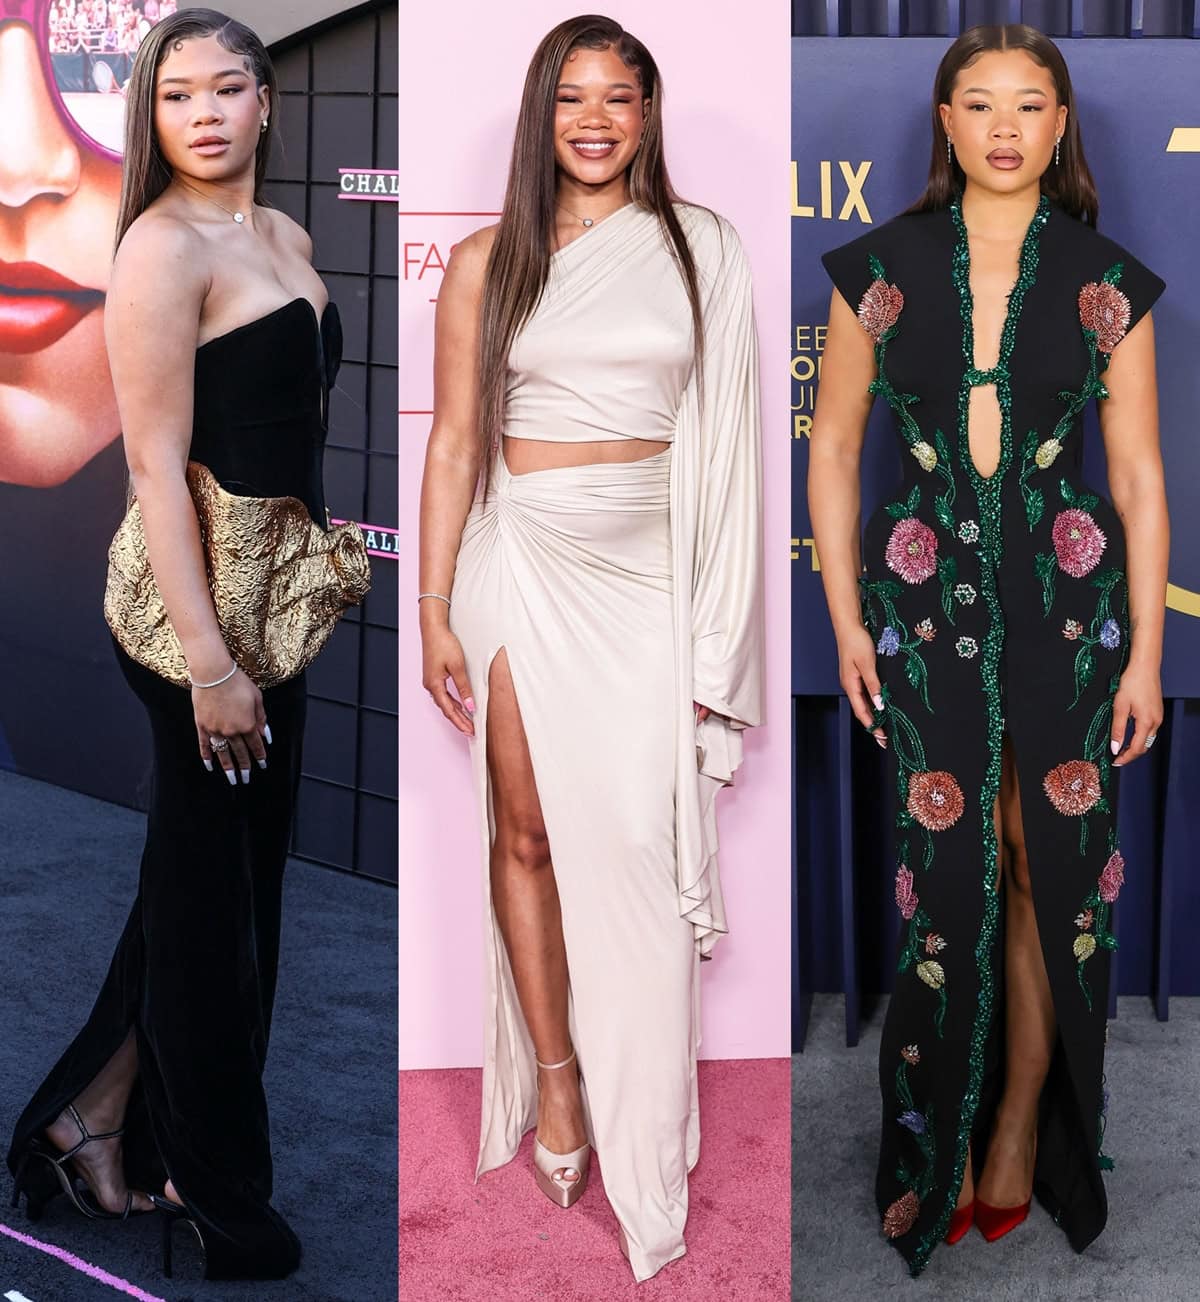 Storm Reid showcases a trilogy of styles: a classic black velvet dress with a standout gold bow at the 'Challengers' premiere, a chic asymmetrical tan gown at the Fashion Trust US Awards, and a boldly embroidered black ensemble at the SAG Awards, each look perfectly capturing the essence of contemporary glamour